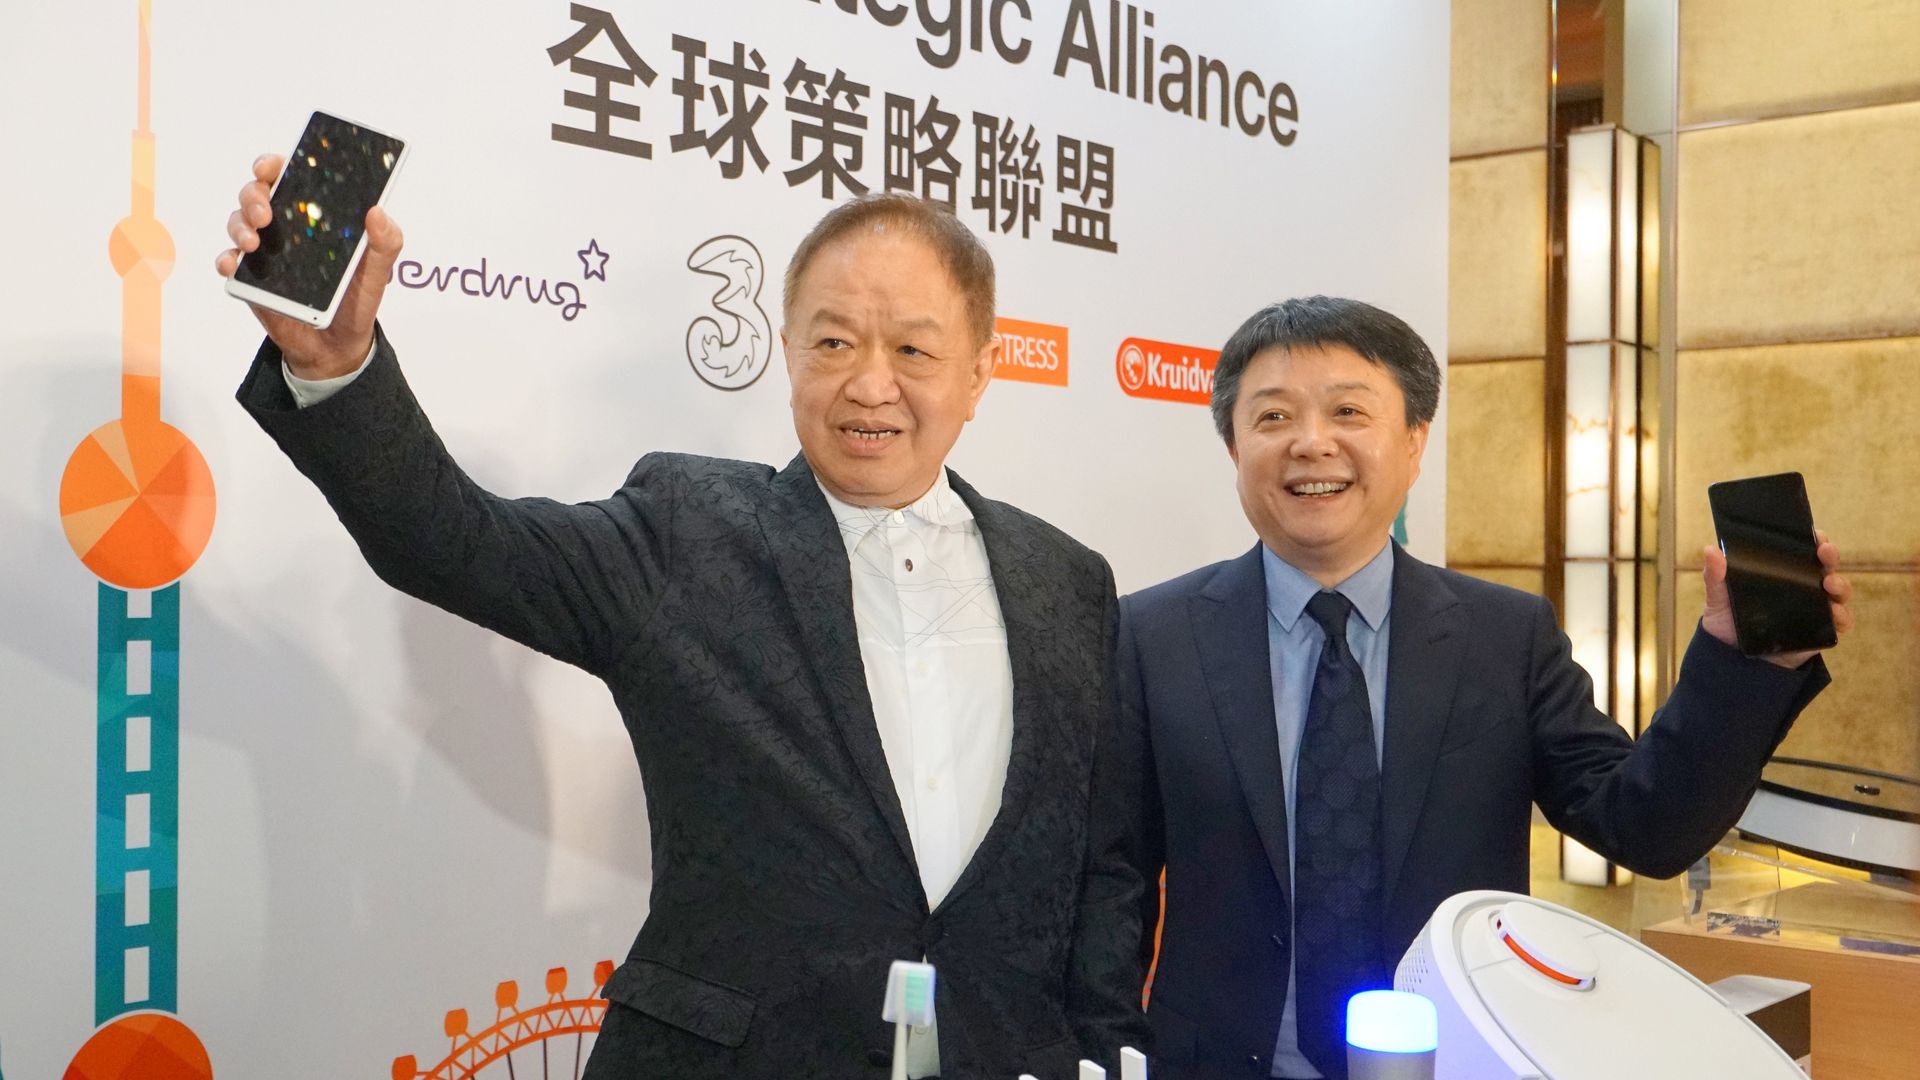 Canning Fok (L), group co-managing director of CK Hutchison, holds up a phone. He stands next to Wang Xiang, senior vice president of Xiaomi.